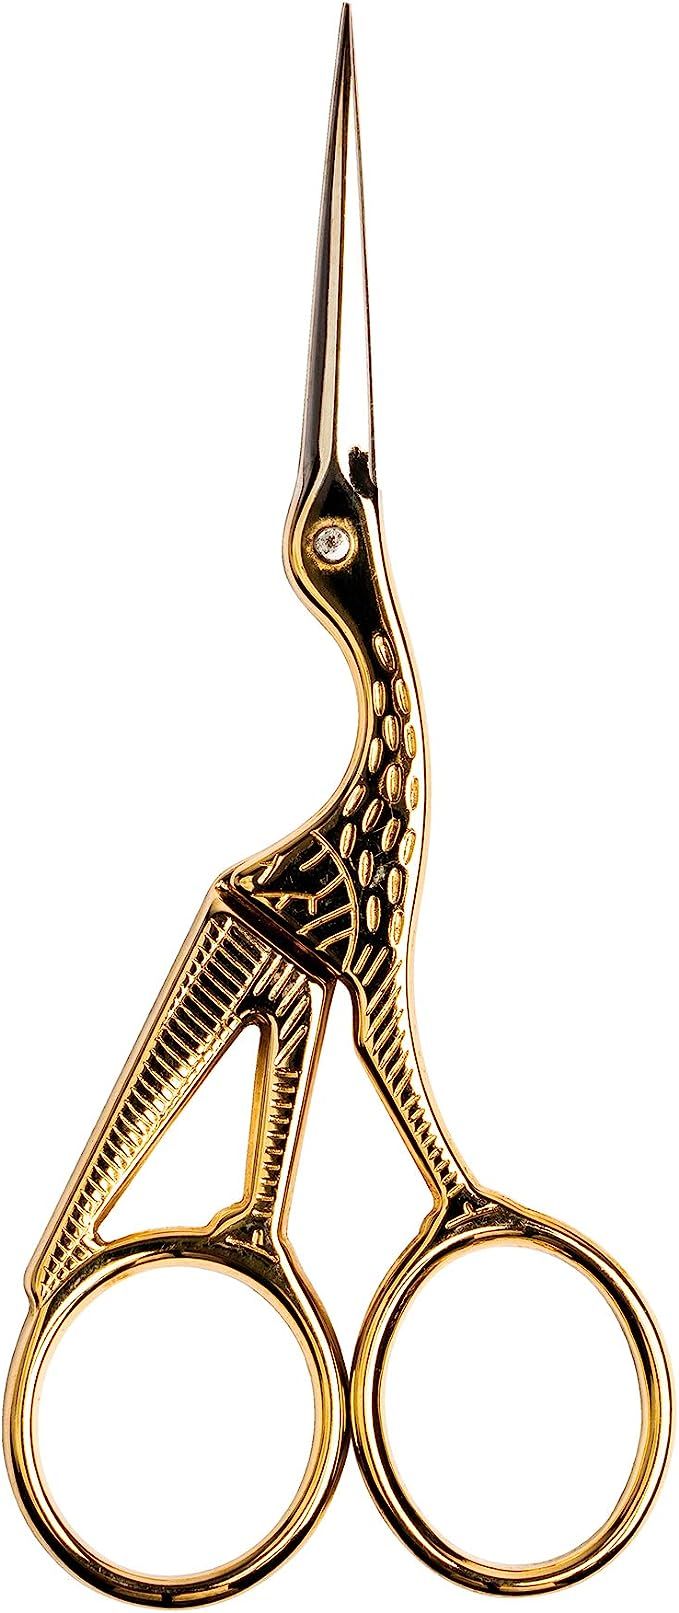 SINGER 4.5” Forged Embroidery Gold Plated, Stork Design Scissors, Titanium | Amazon (US)